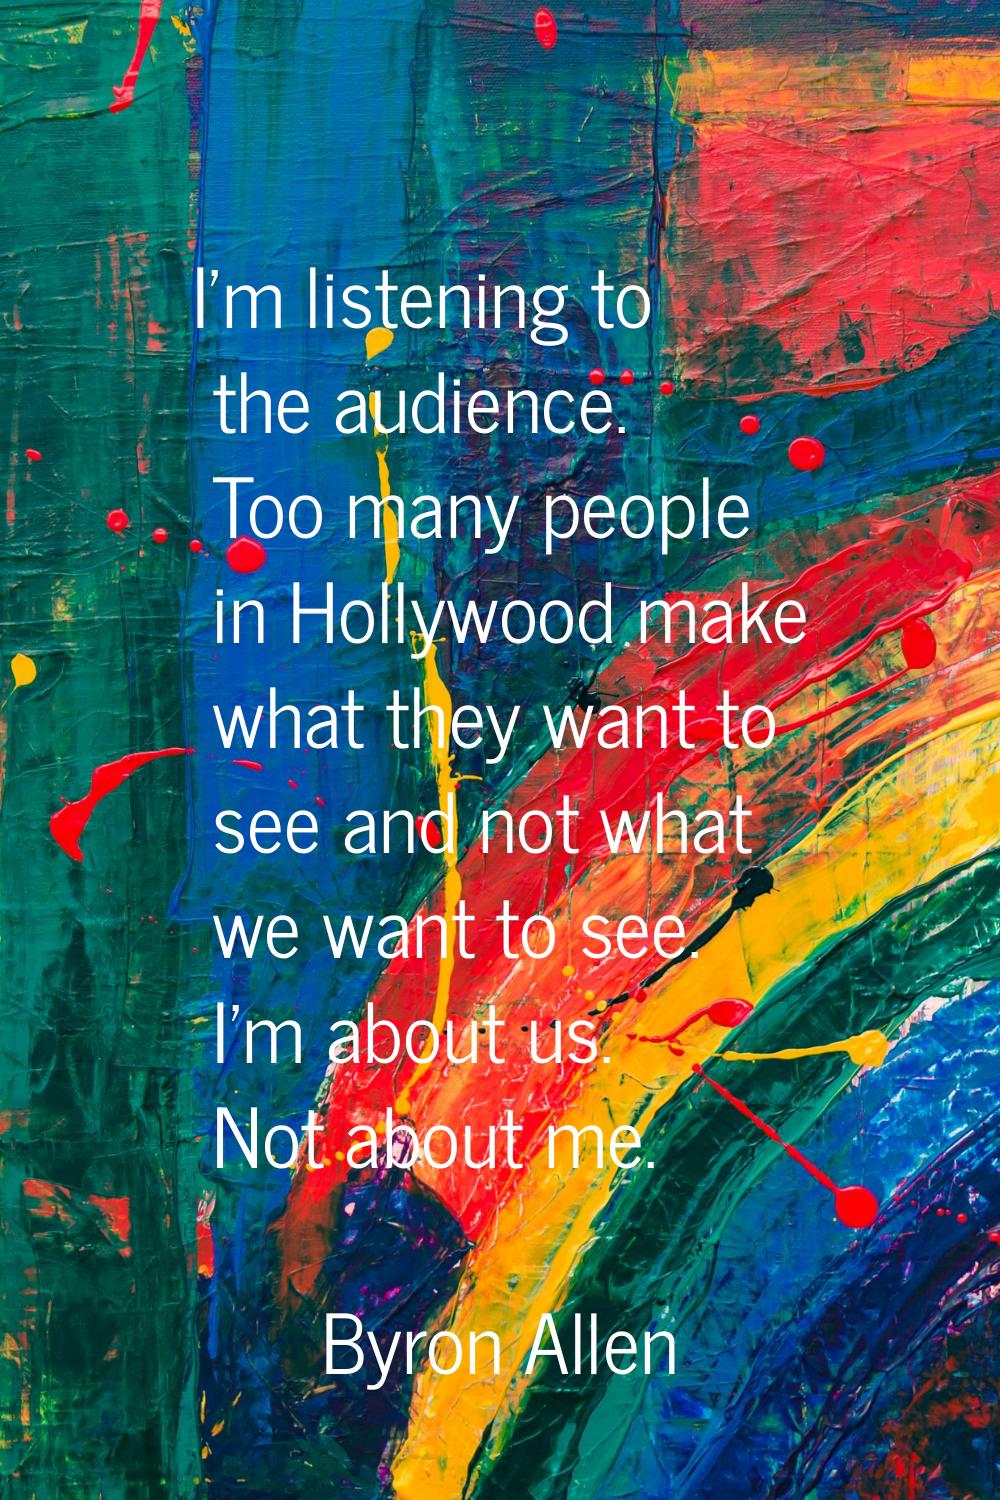 I'm listening to the audience. Too many people in Hollywood make what they want to see and not what